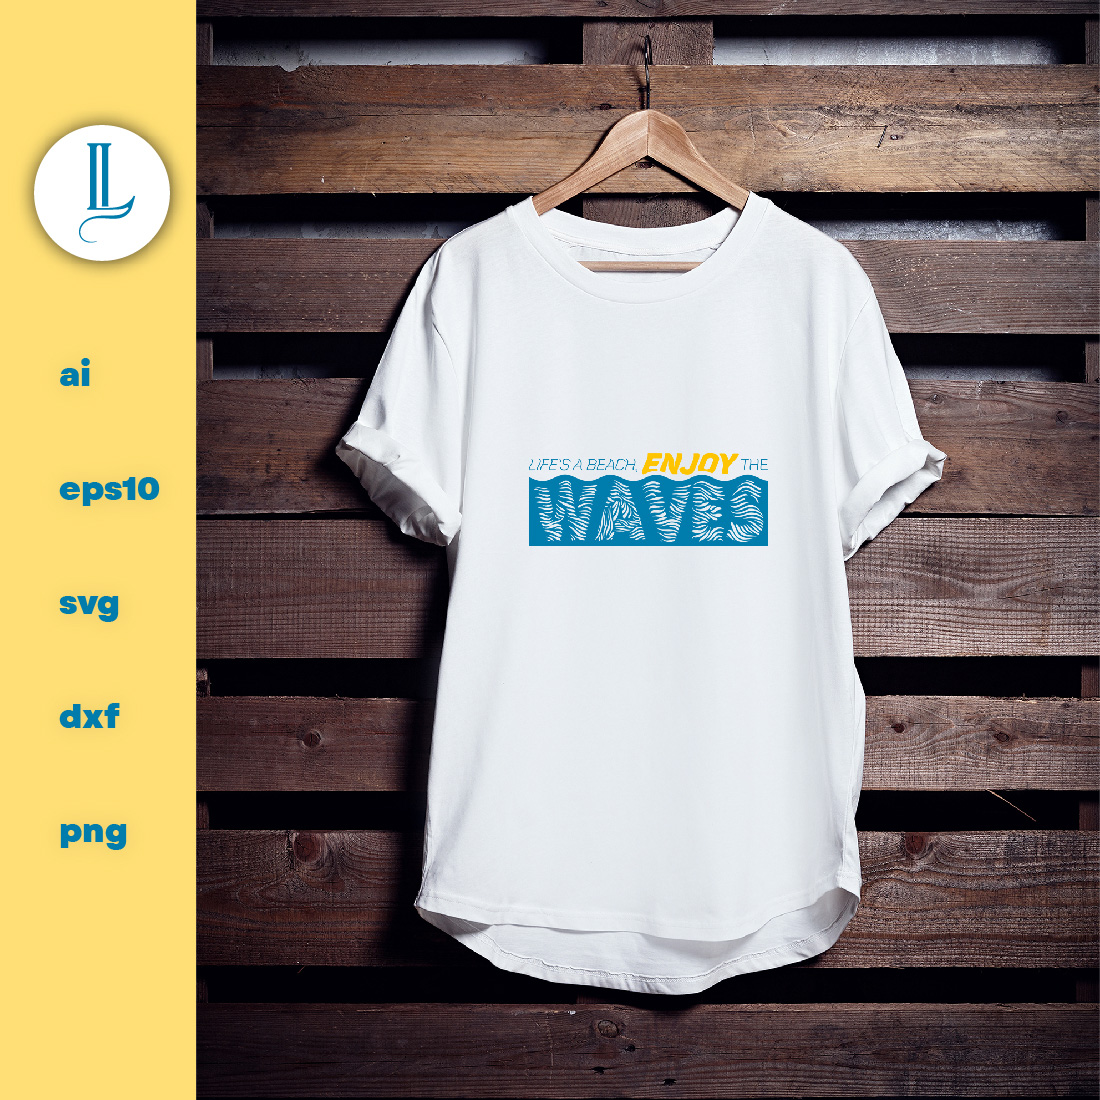 Life's a beach, enjoy the waves preview image.